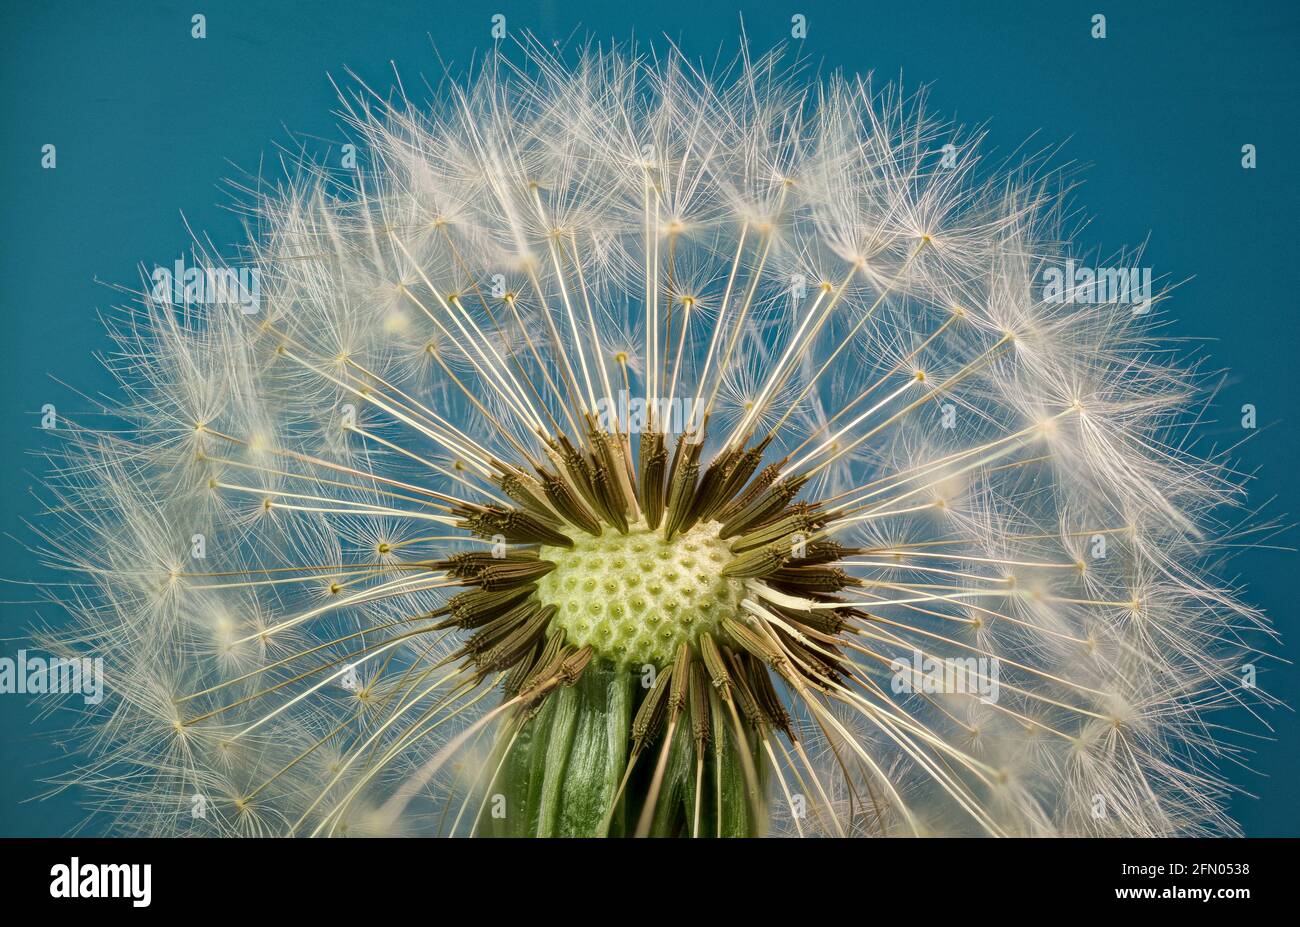 Macro view of seed head of dandelion (Taraxacum officinale), showing seeds with pappus disks, which carry seeds on the wind. Stock Photo